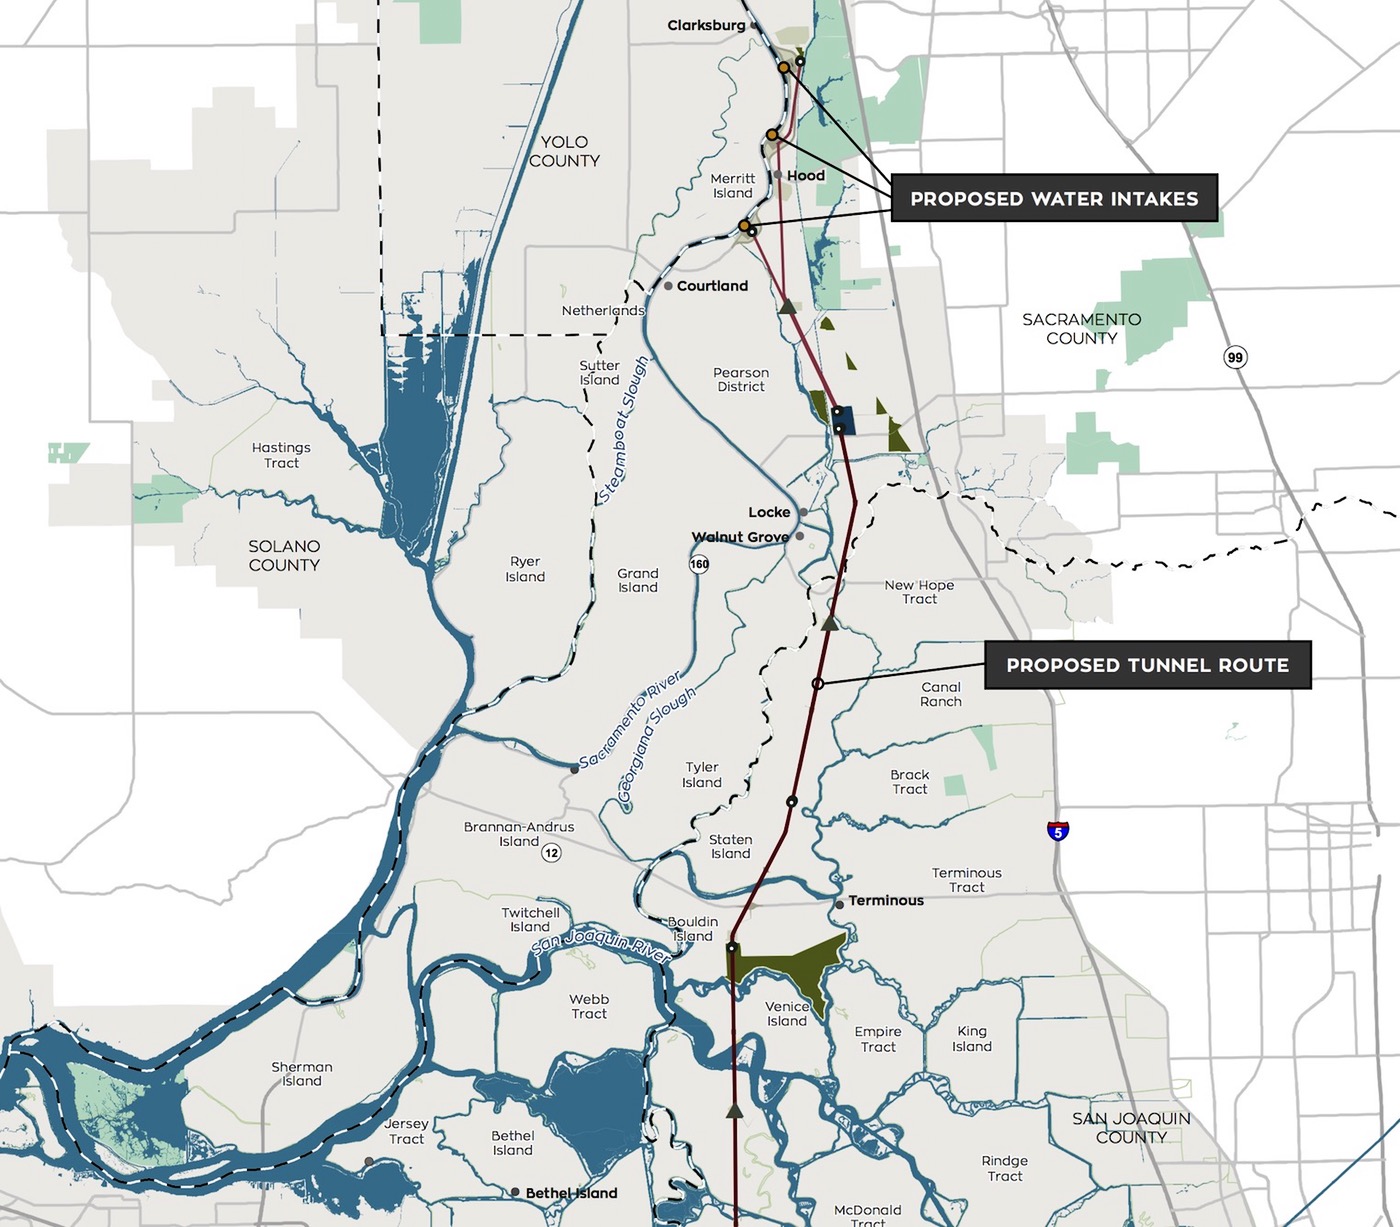 This map of the California WaterFix project shows part of the route for the proposed twin water diversion tunnels across the Sacramento-San Joaquin Delta, along with intakes and some other facilities. 